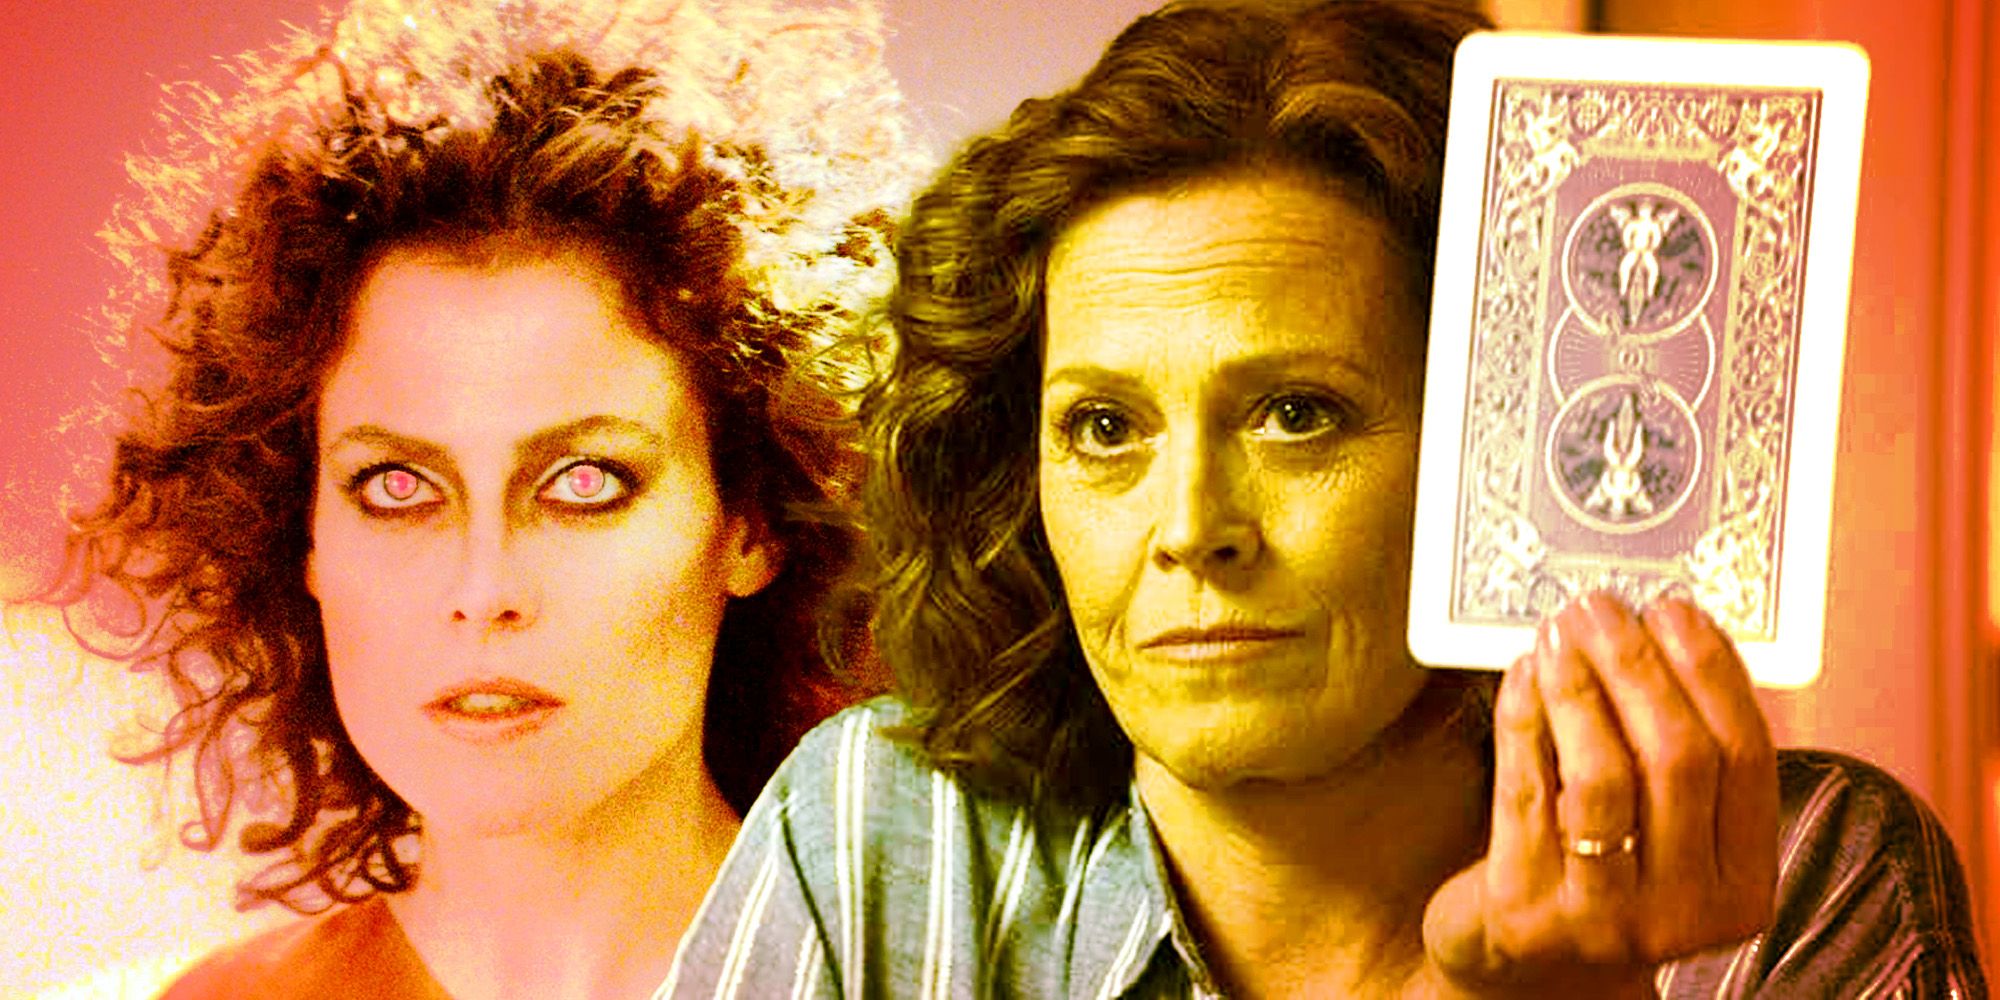 Sigourney Weaver in Ghostbusters and cameo in Afterlife